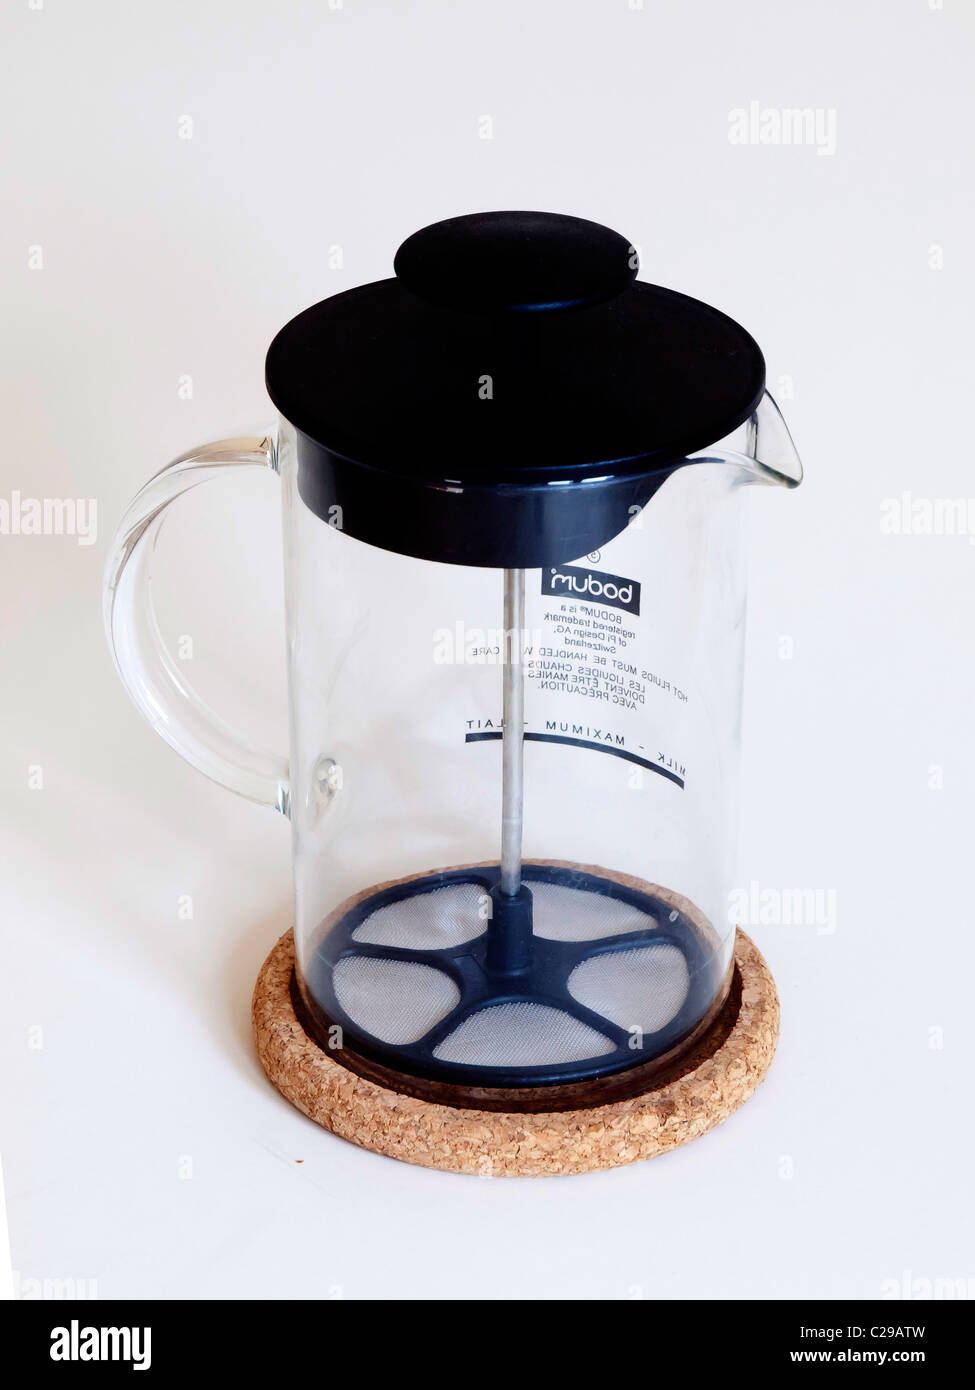 A glass milk frother for frothing hot milk for example for